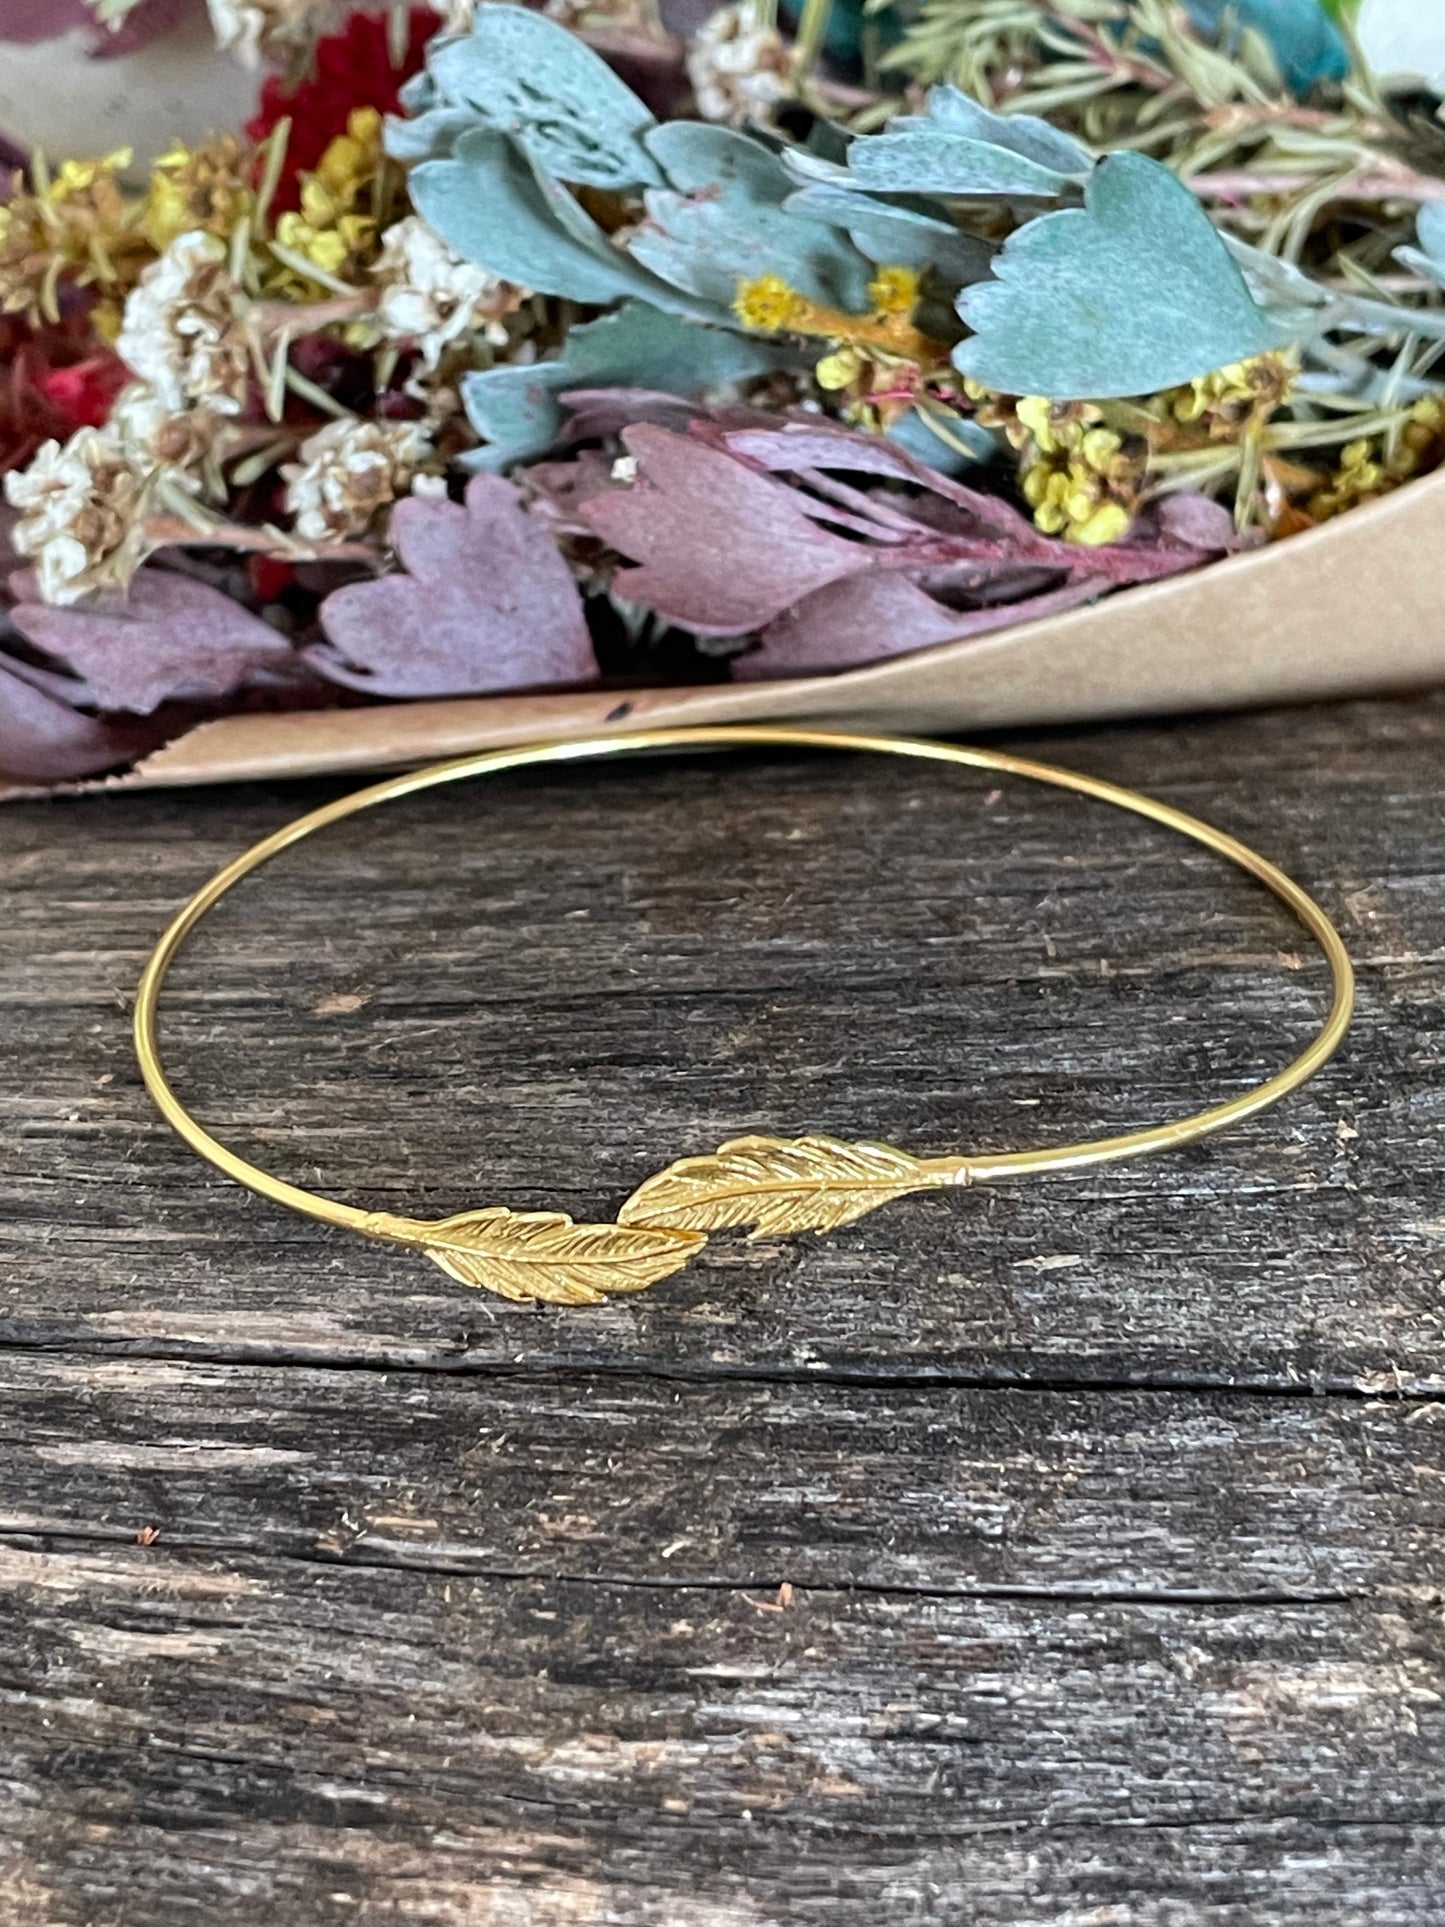 Goddess Gold collection ~ Adjustable Feather Cuff